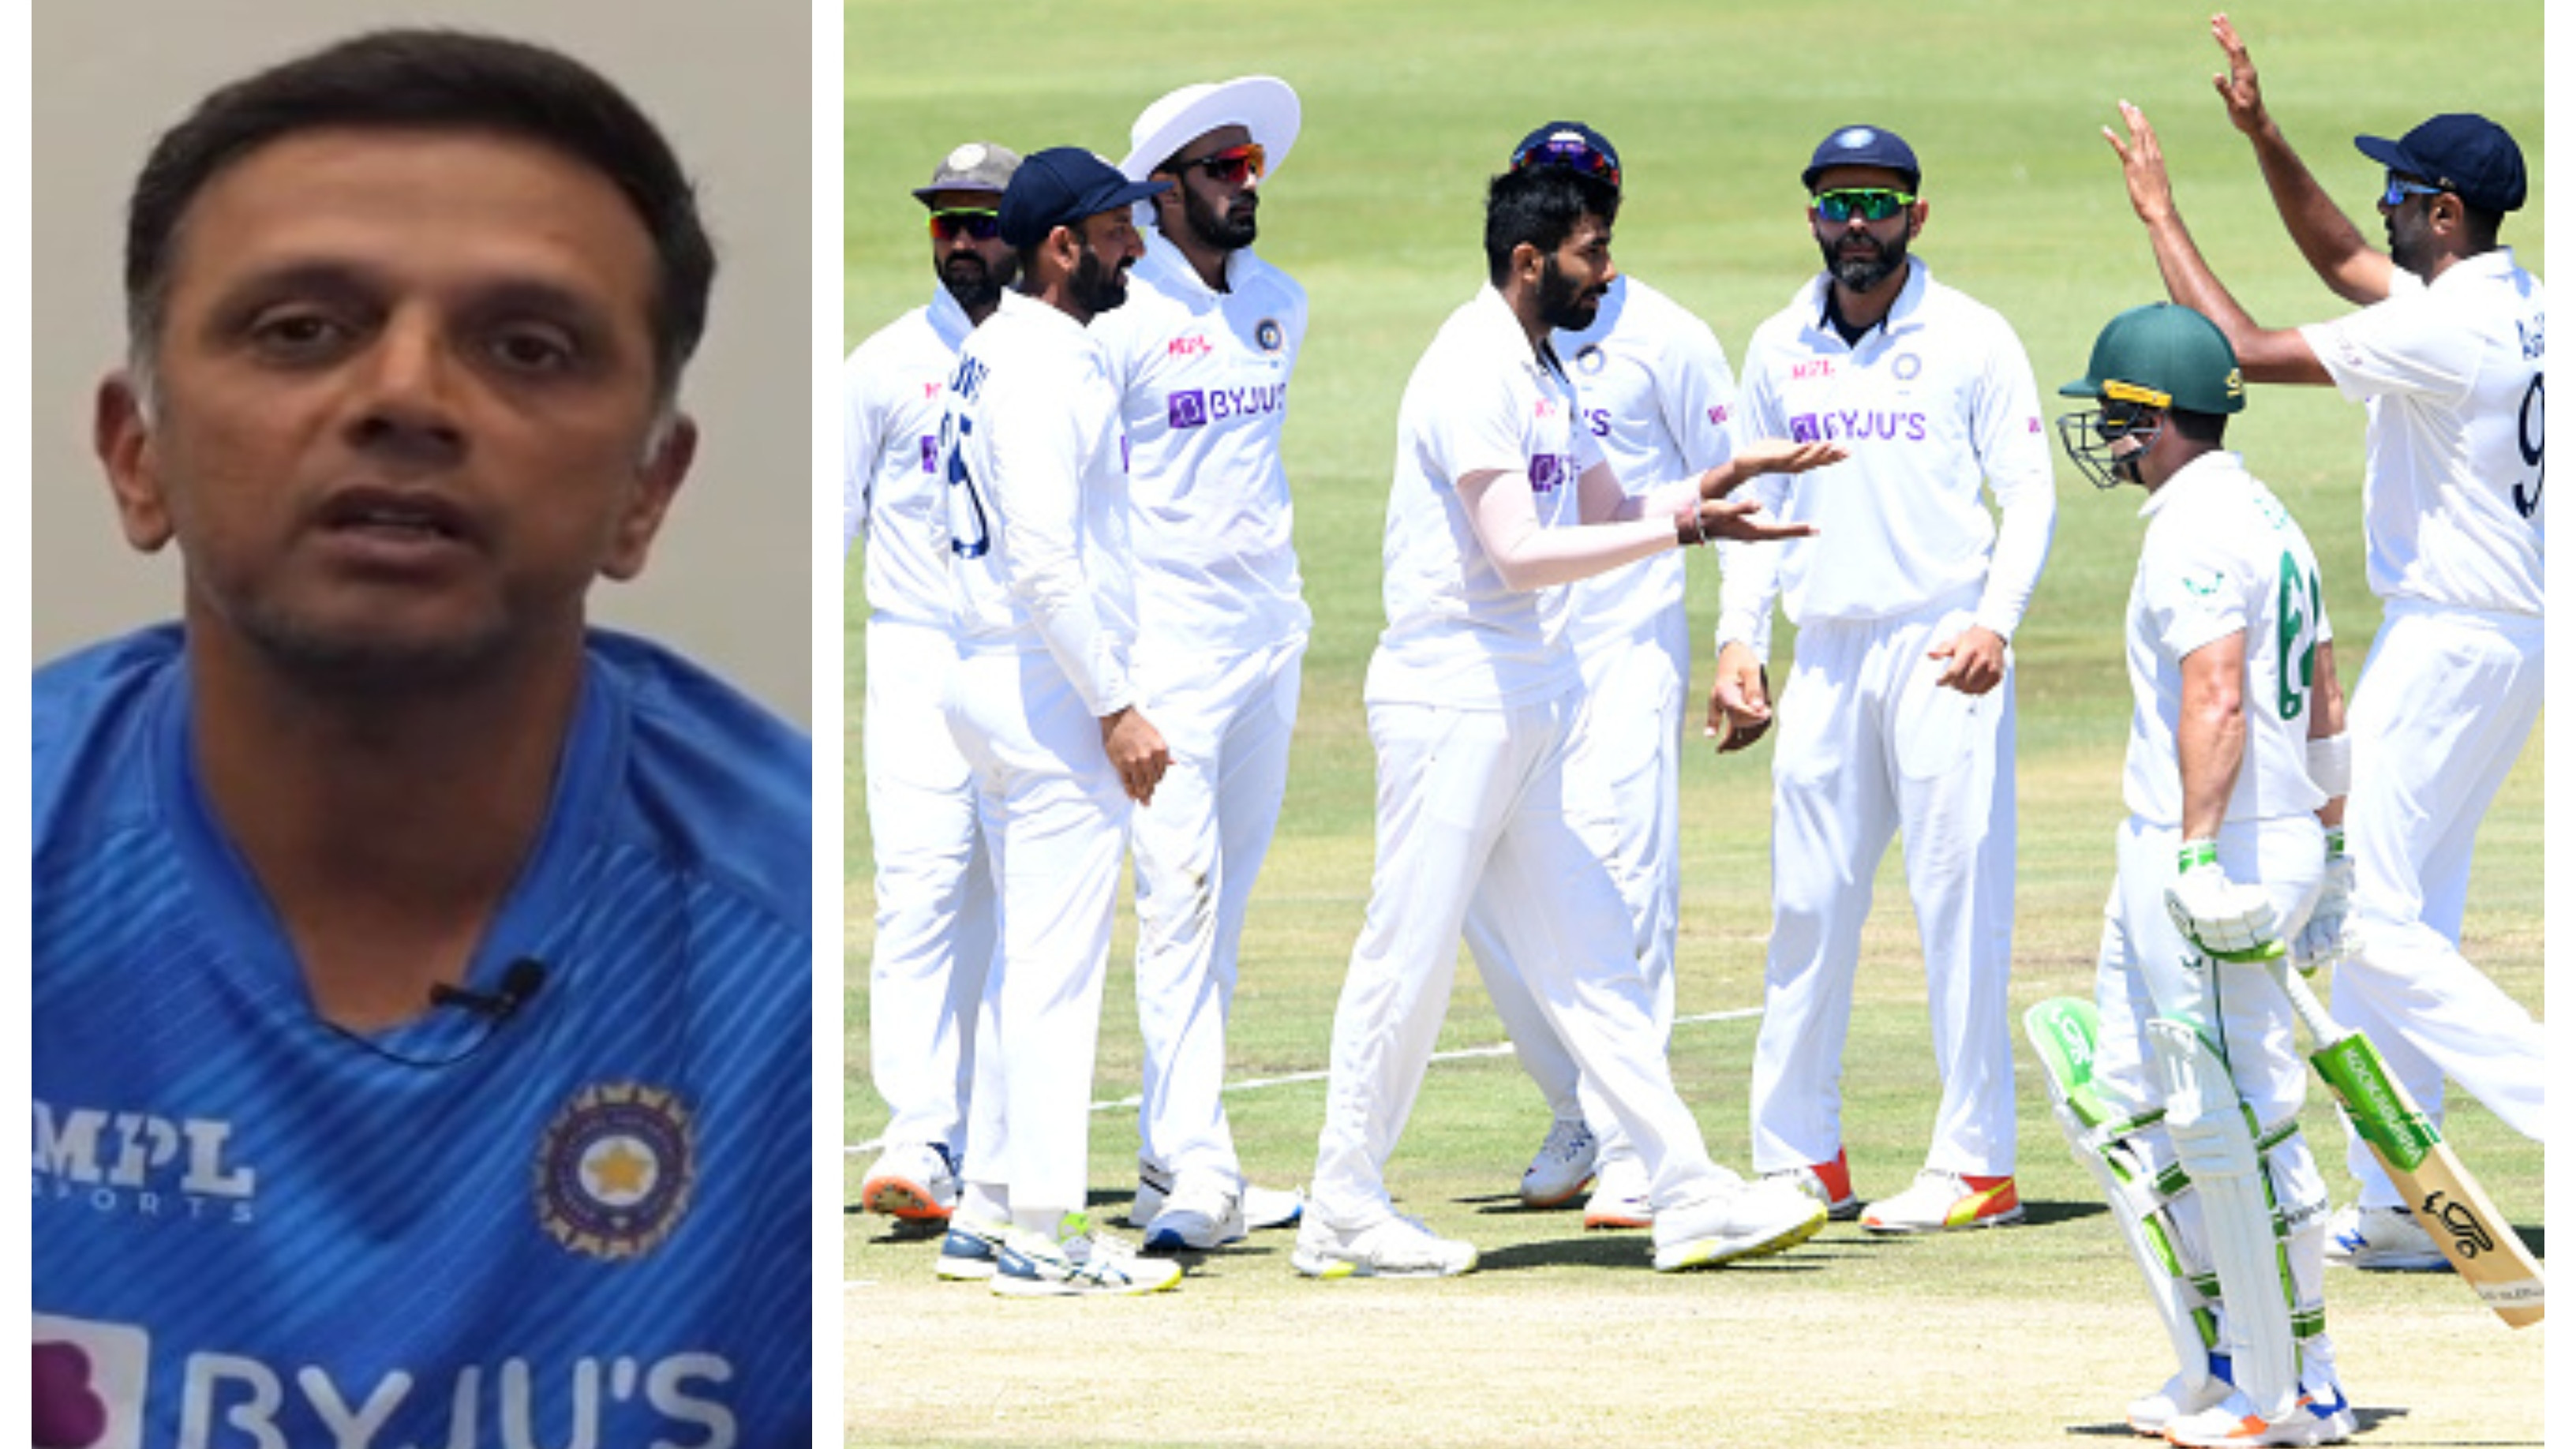 SA v IND 2021-22: ‘We need to react and respond better’, Dravid on losing WTC point for over-rate offence